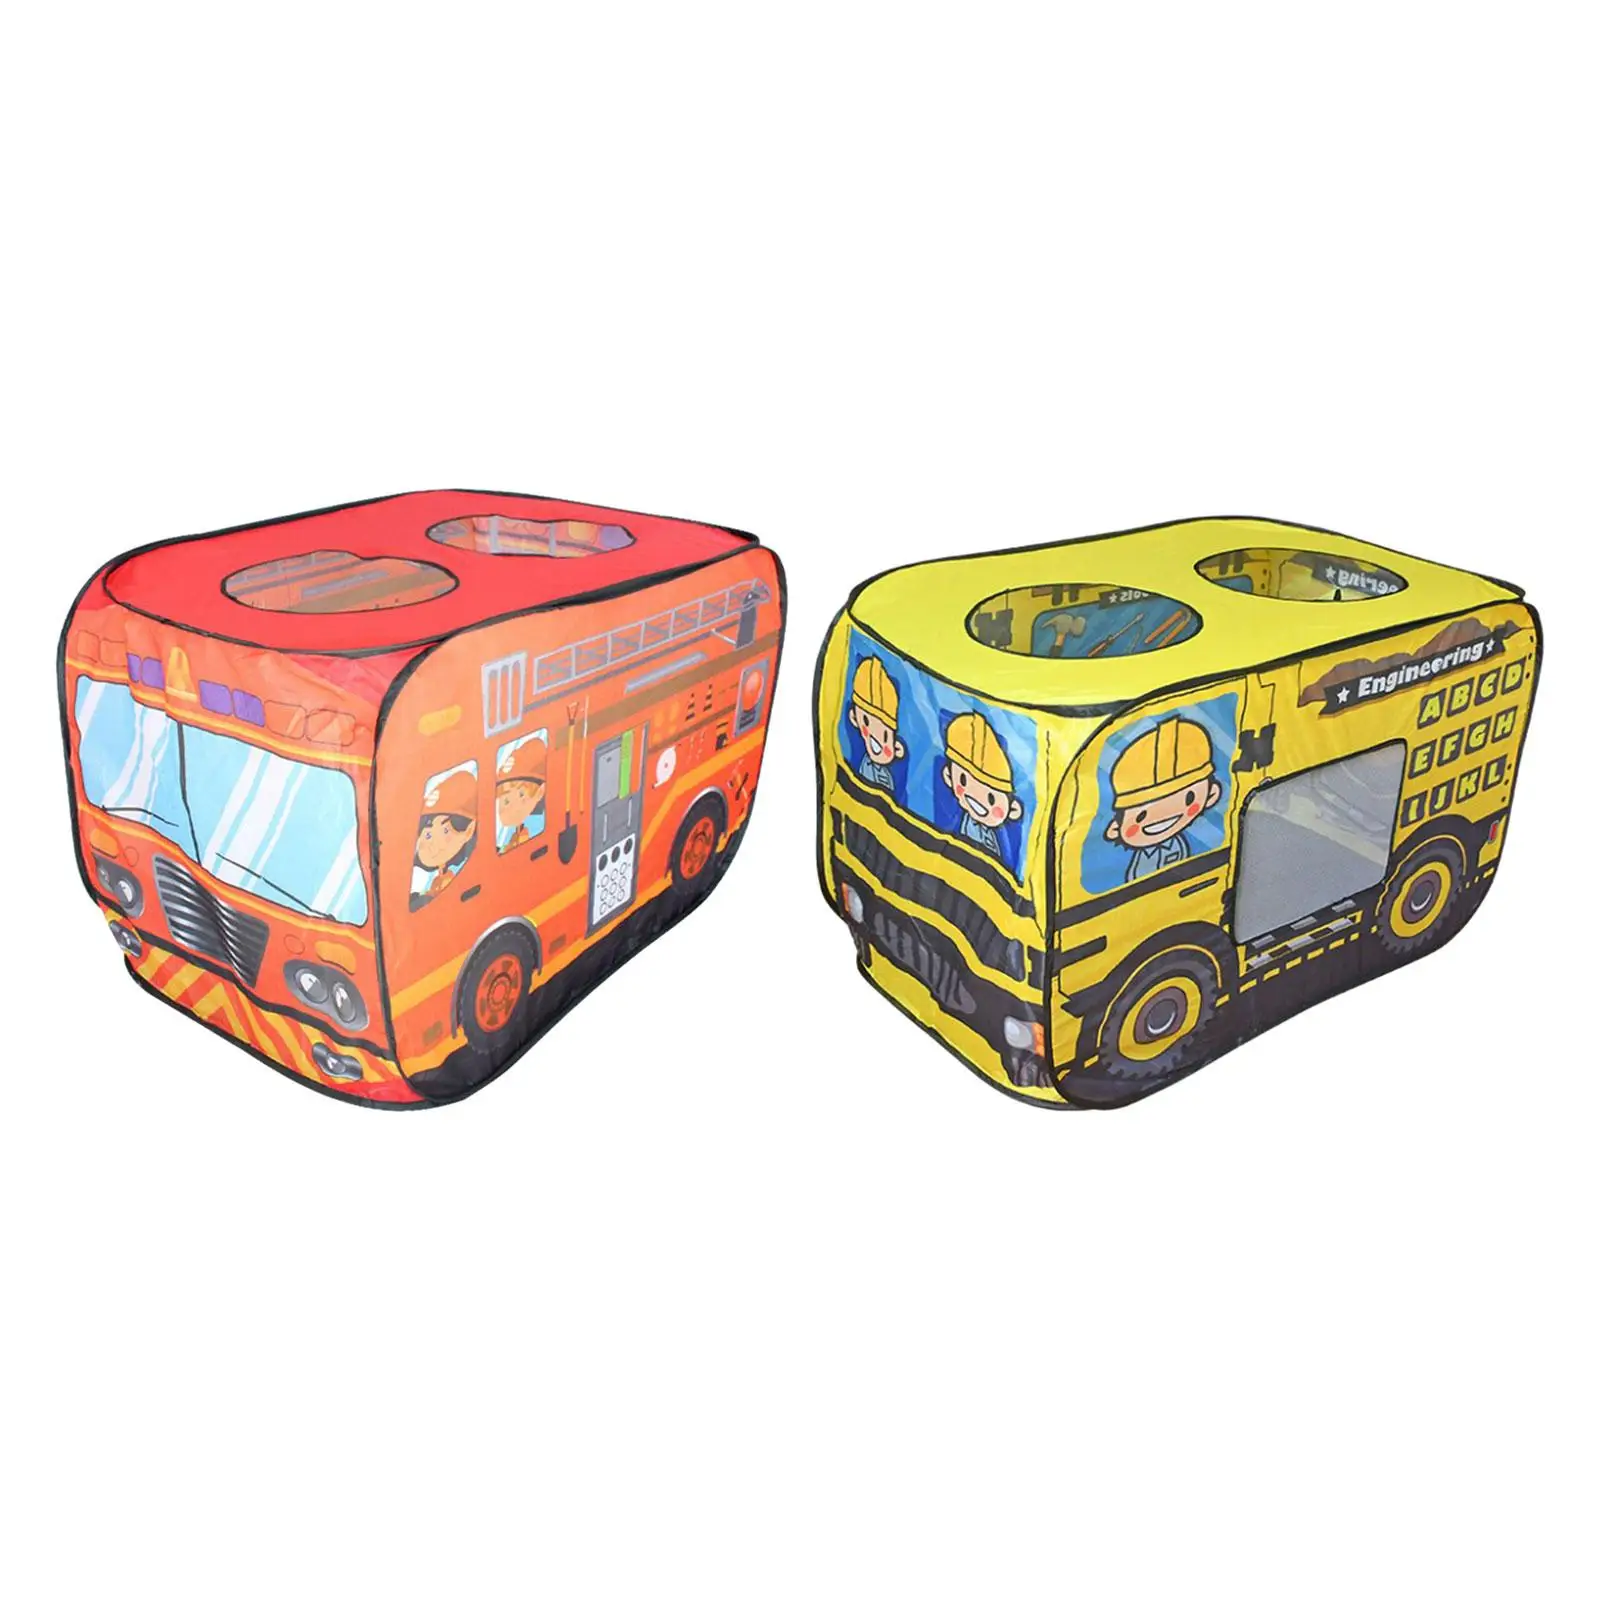 Cartoon Car Play Tent Kids Playhouse Castle Children Games Play Fun Foldable Tent for Yard Outdoor Indoor Garden Gifts